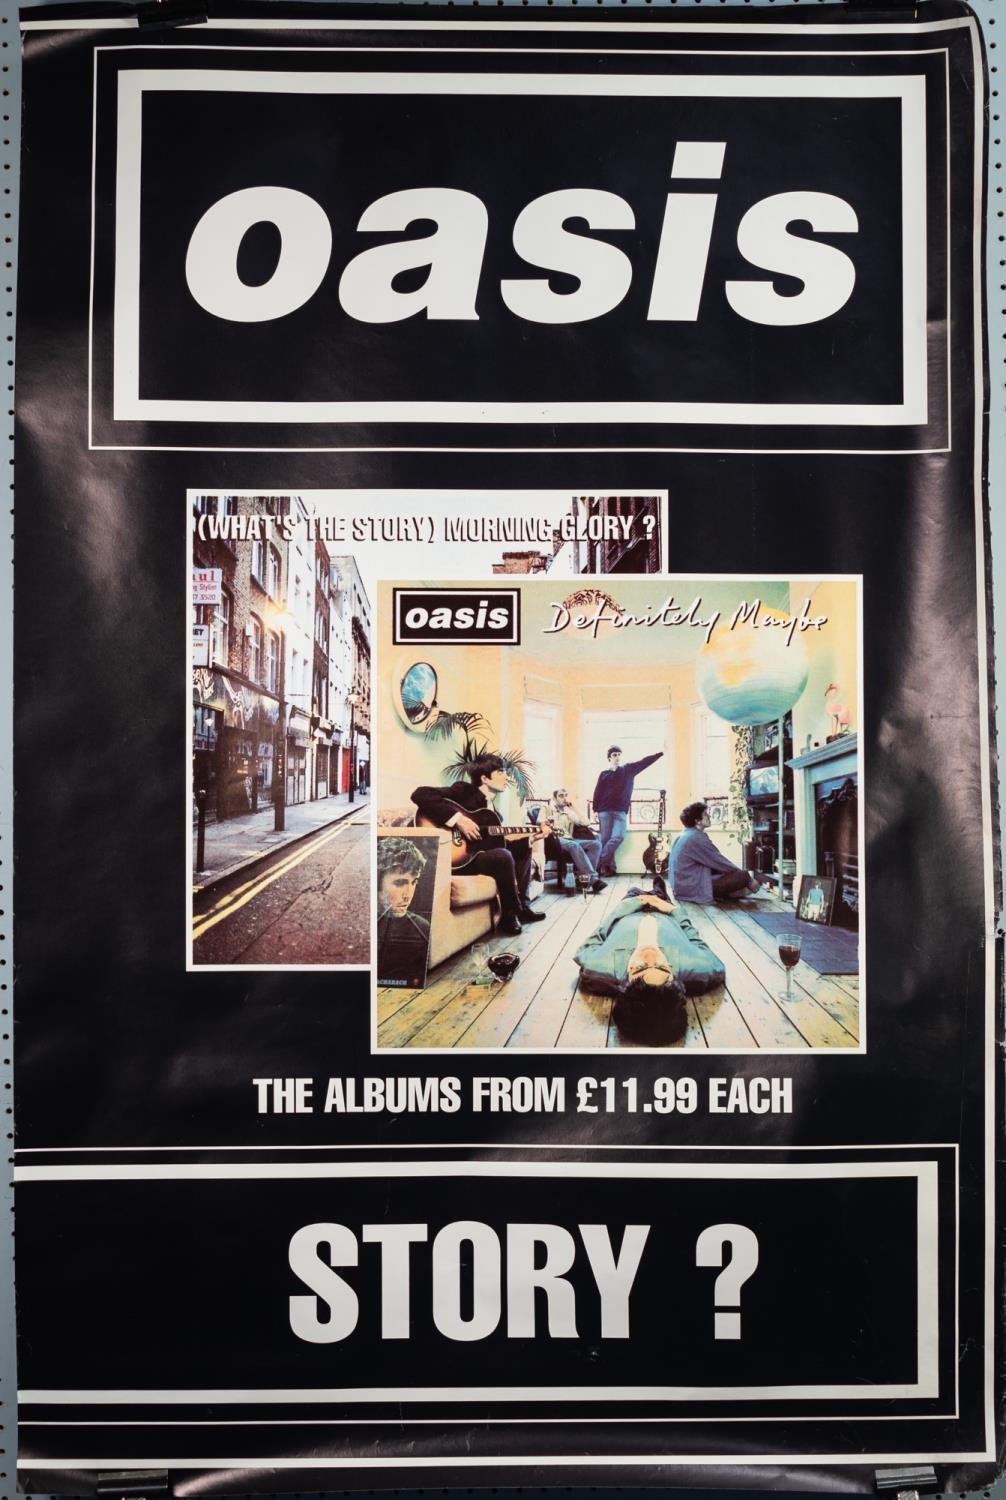 OASIS BRITPOP MEMORABILIA. PROMOTIONAL three poster set for OASIS the whole story? Advertising there